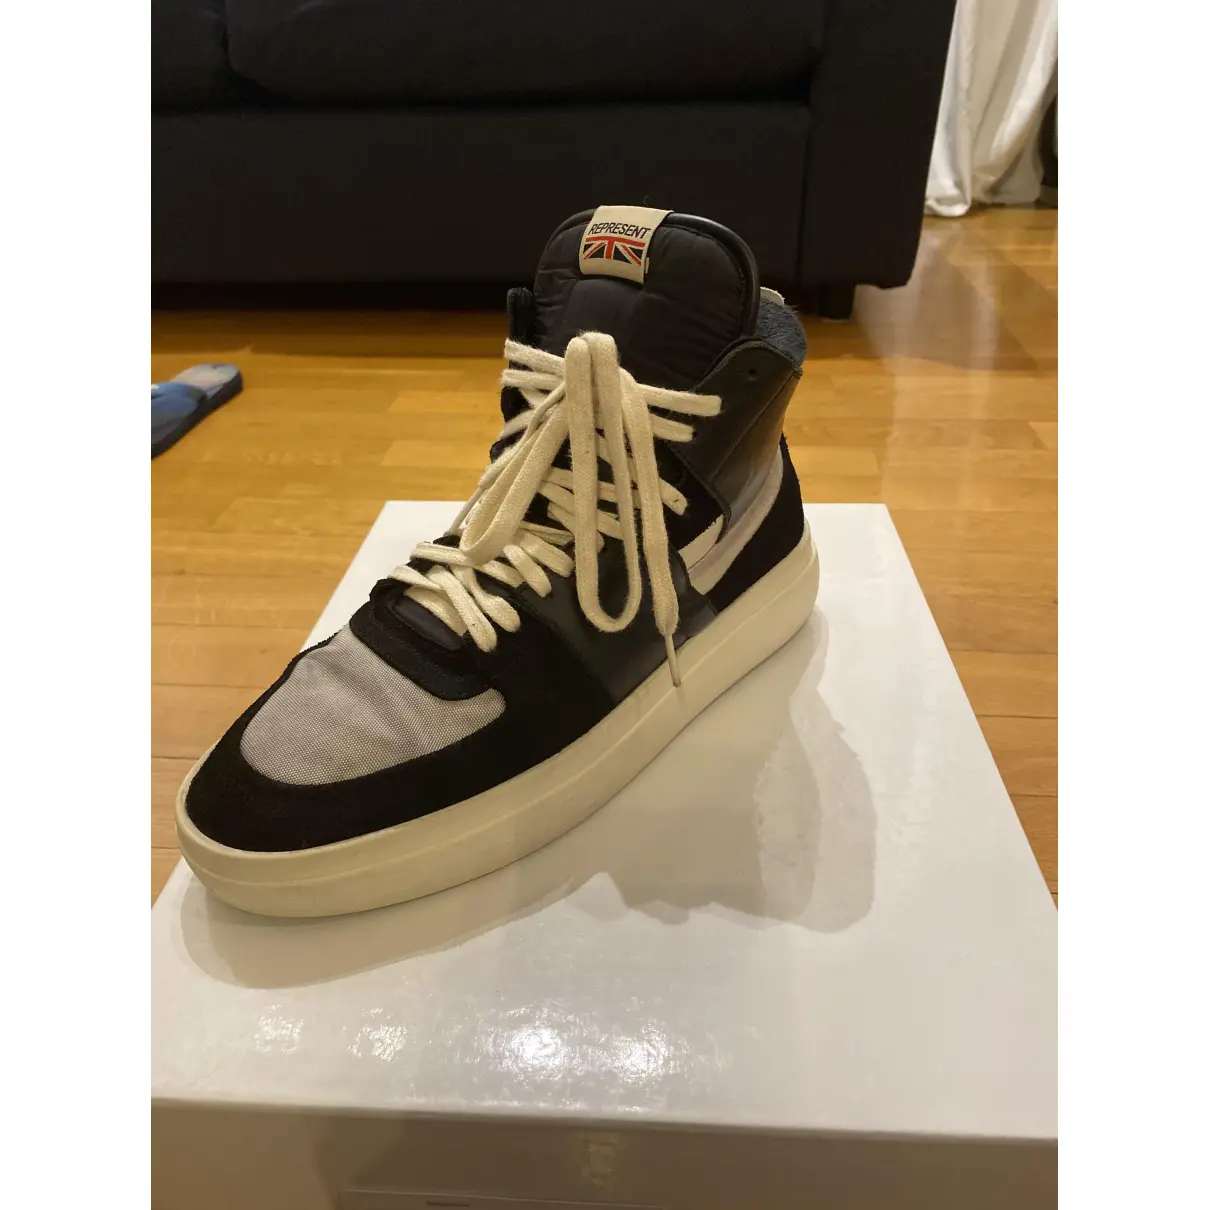 Buy Represent Cloth high trainers online